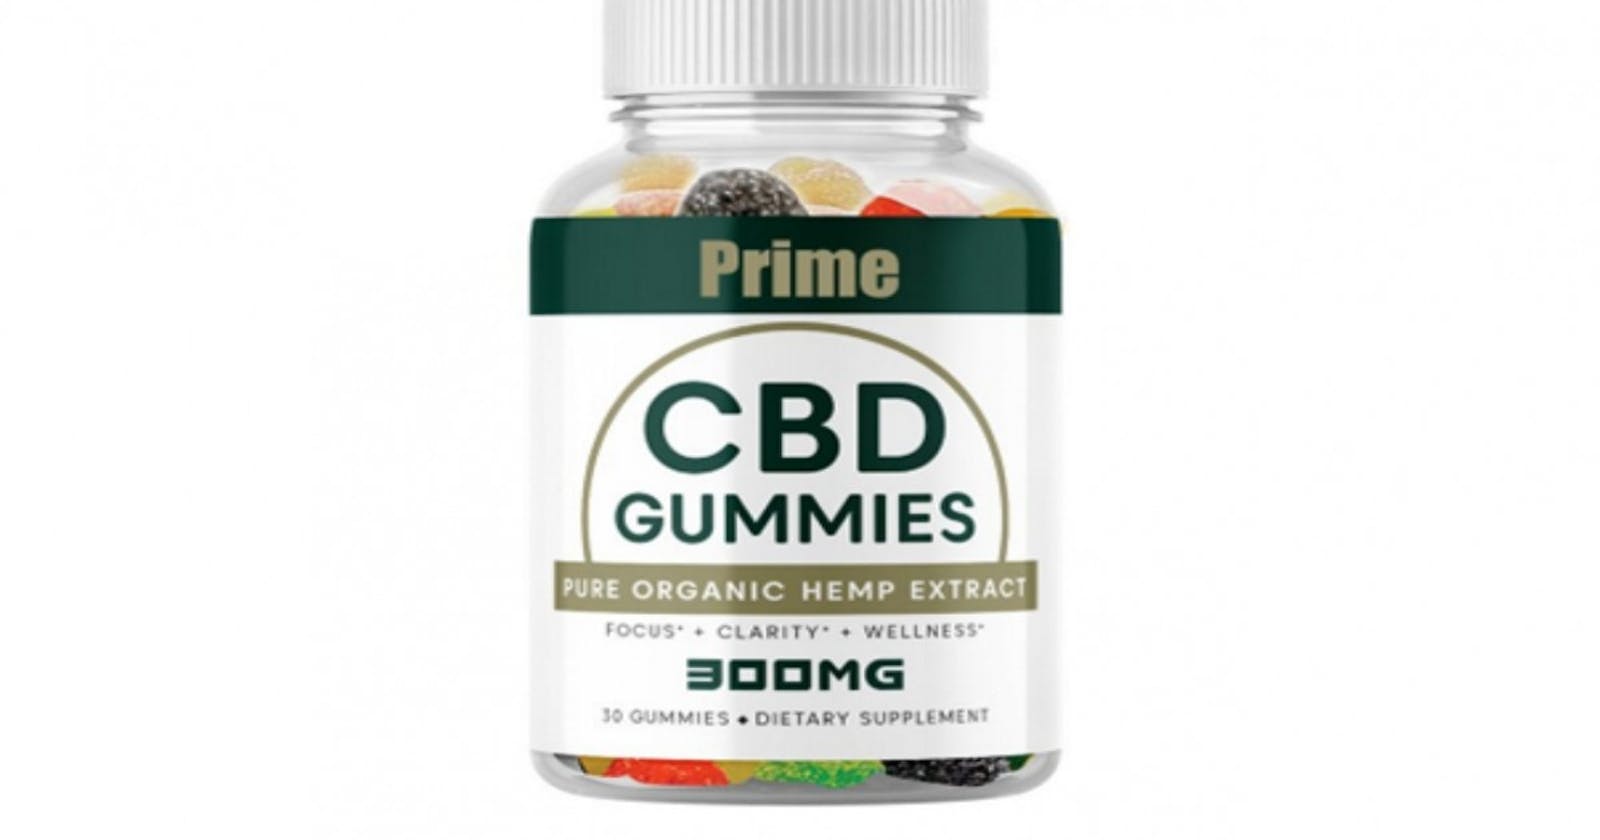 Prime CBD Gummies 300Mg Reviews [2022]:Is It Worth the Money? (Scam or Legit) - Don't Buy Till You Read!– 【Official Website ✔️✔️✔️】